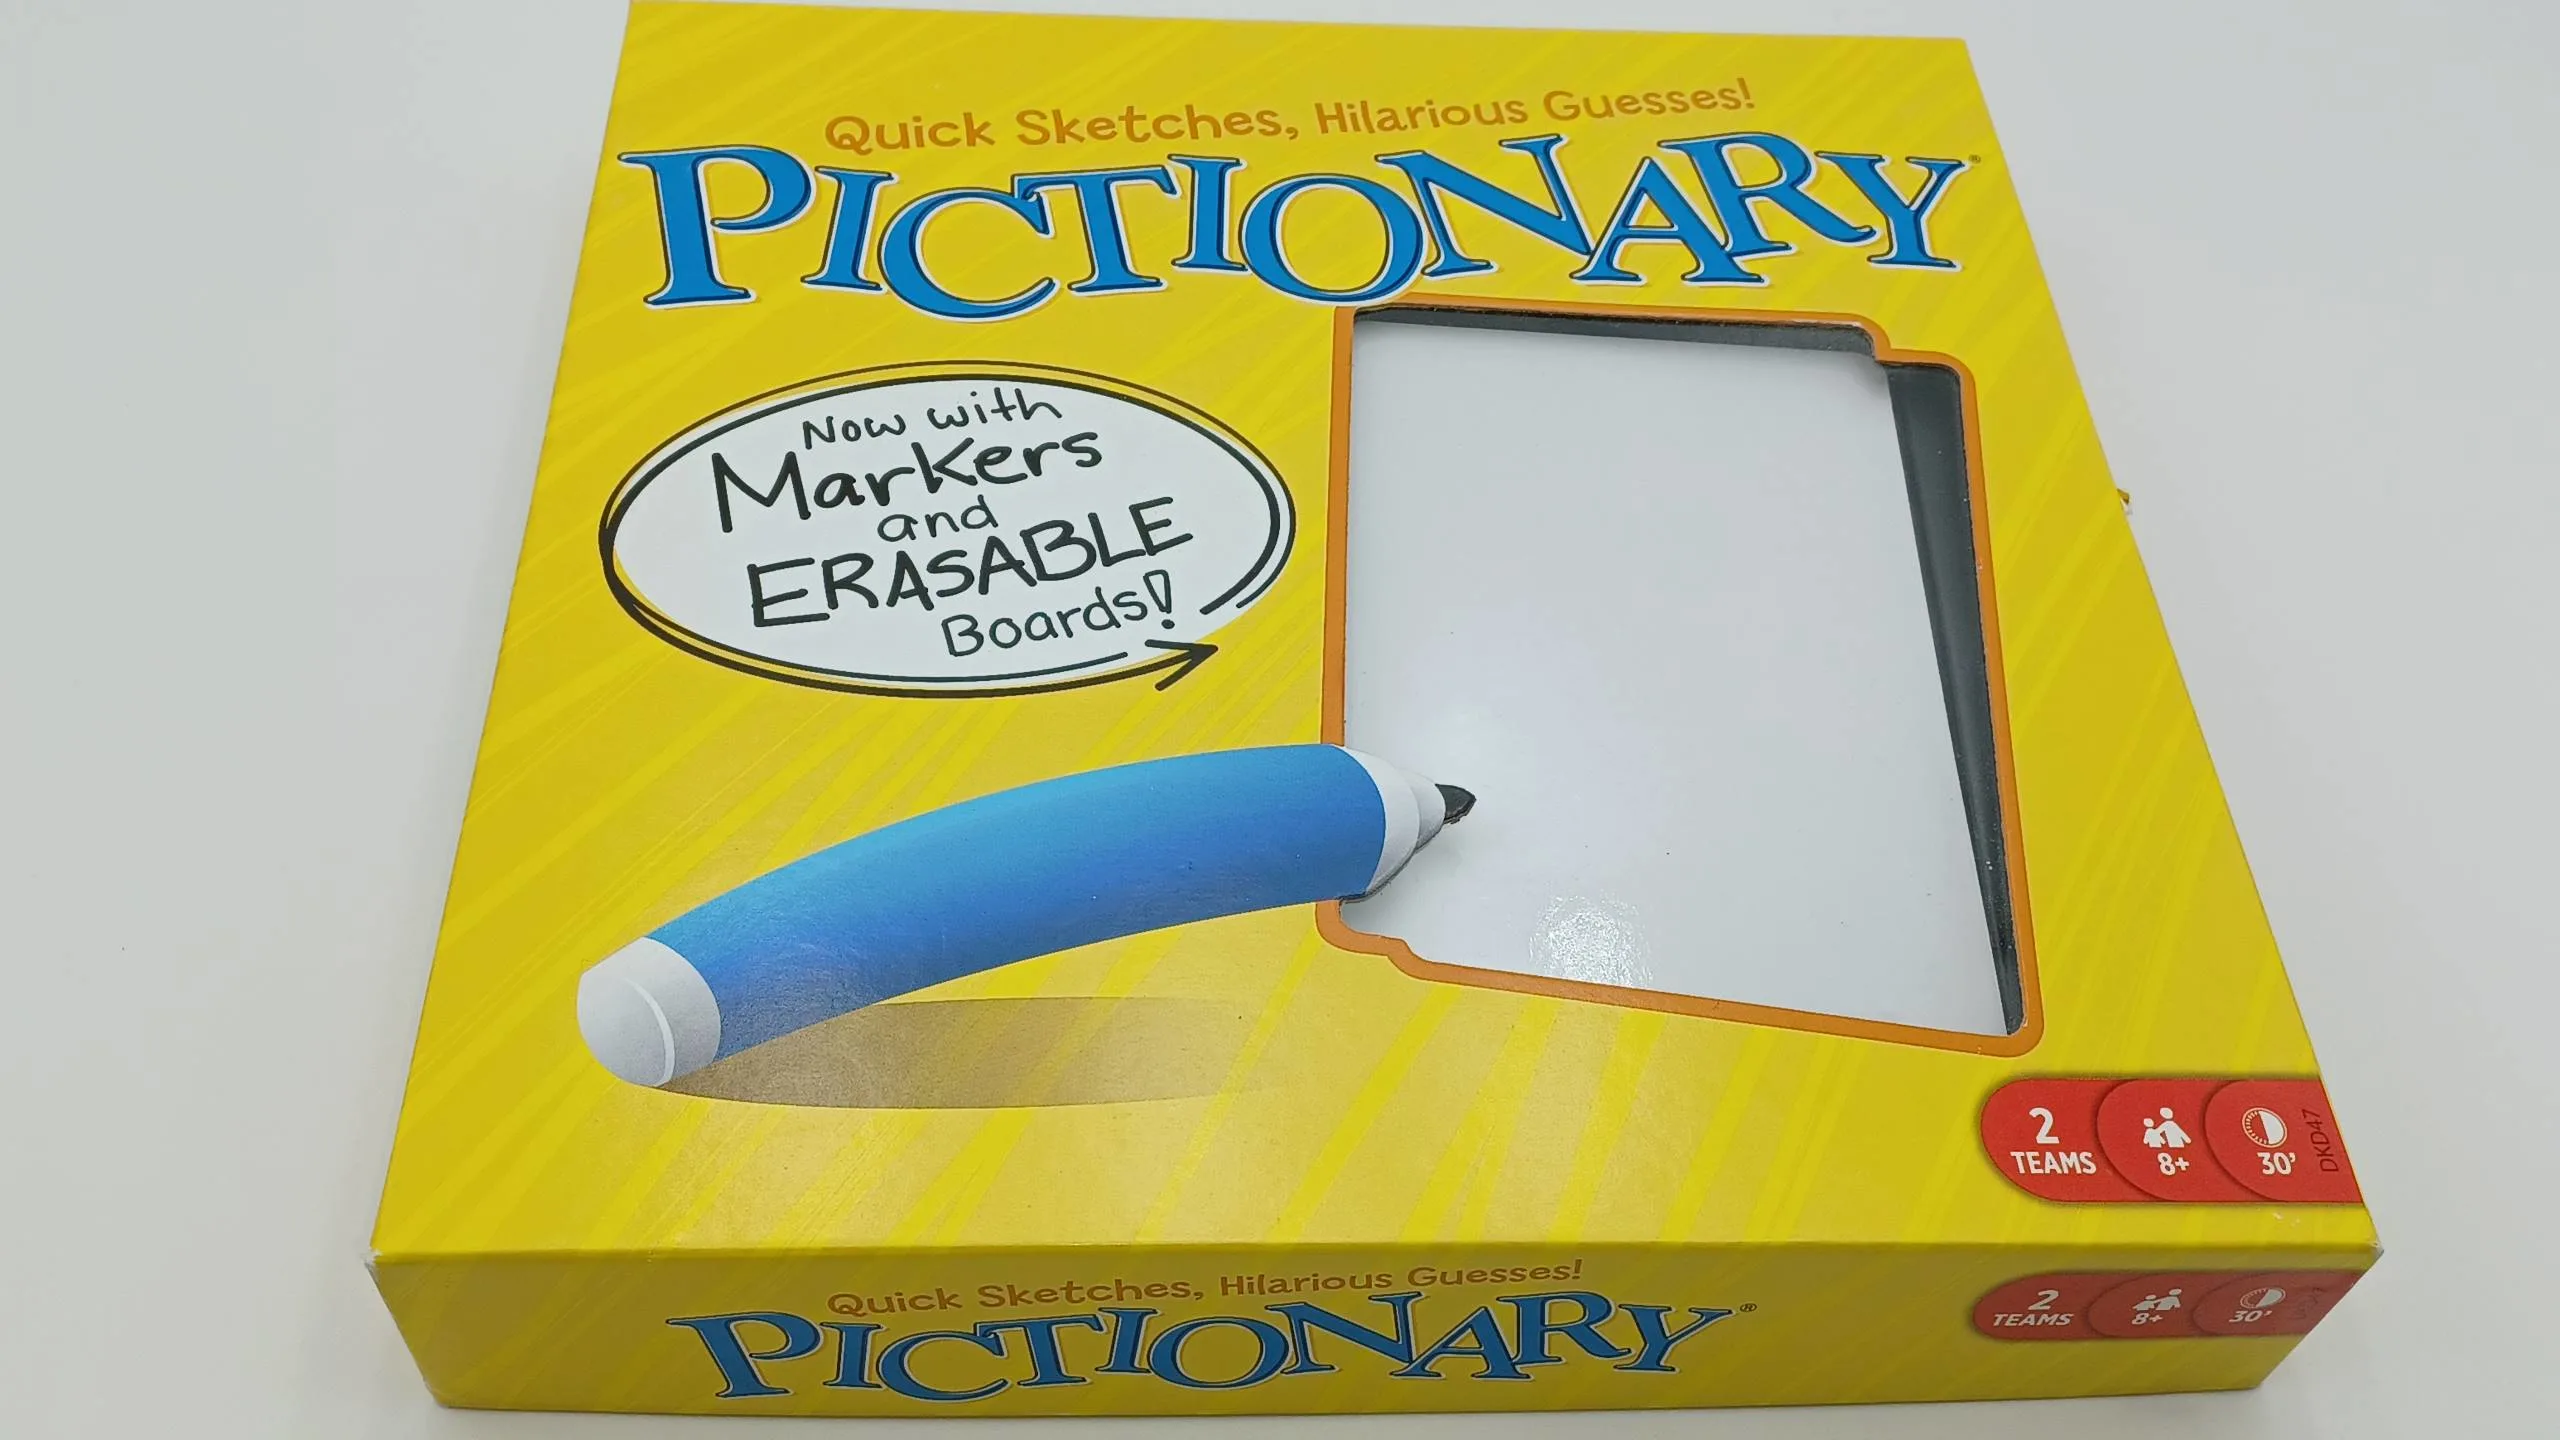 Box for Pictionary